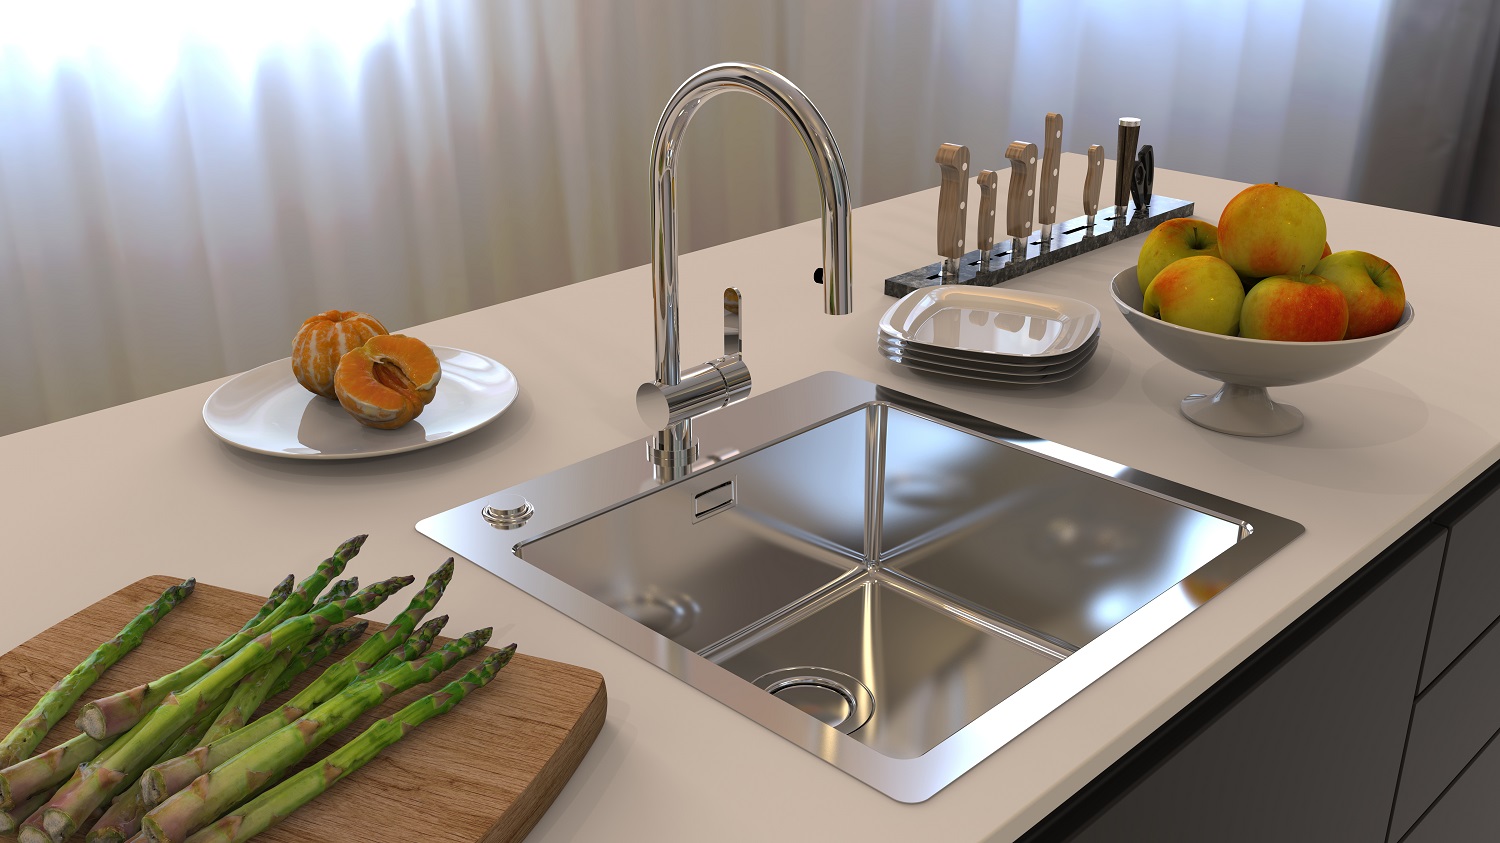 New PURE UP kitchen sink family upgraded with...